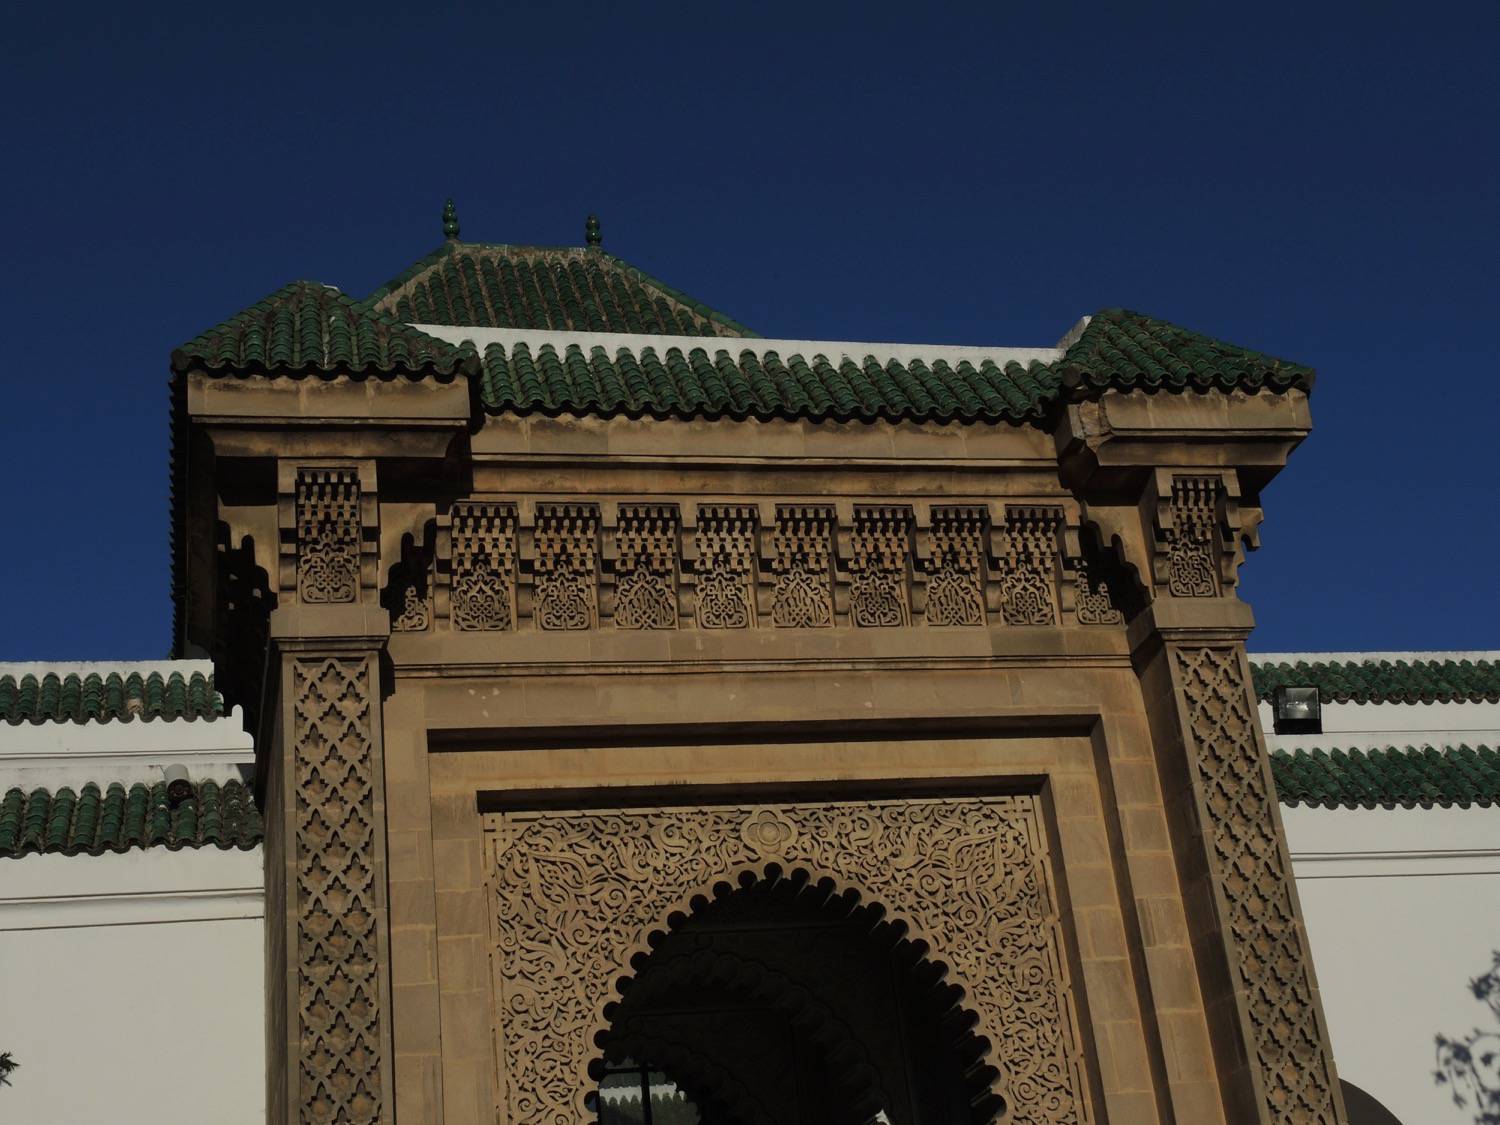 Detail view of top of main portal on Avenue Sidi Mohammed Ben Abdallah